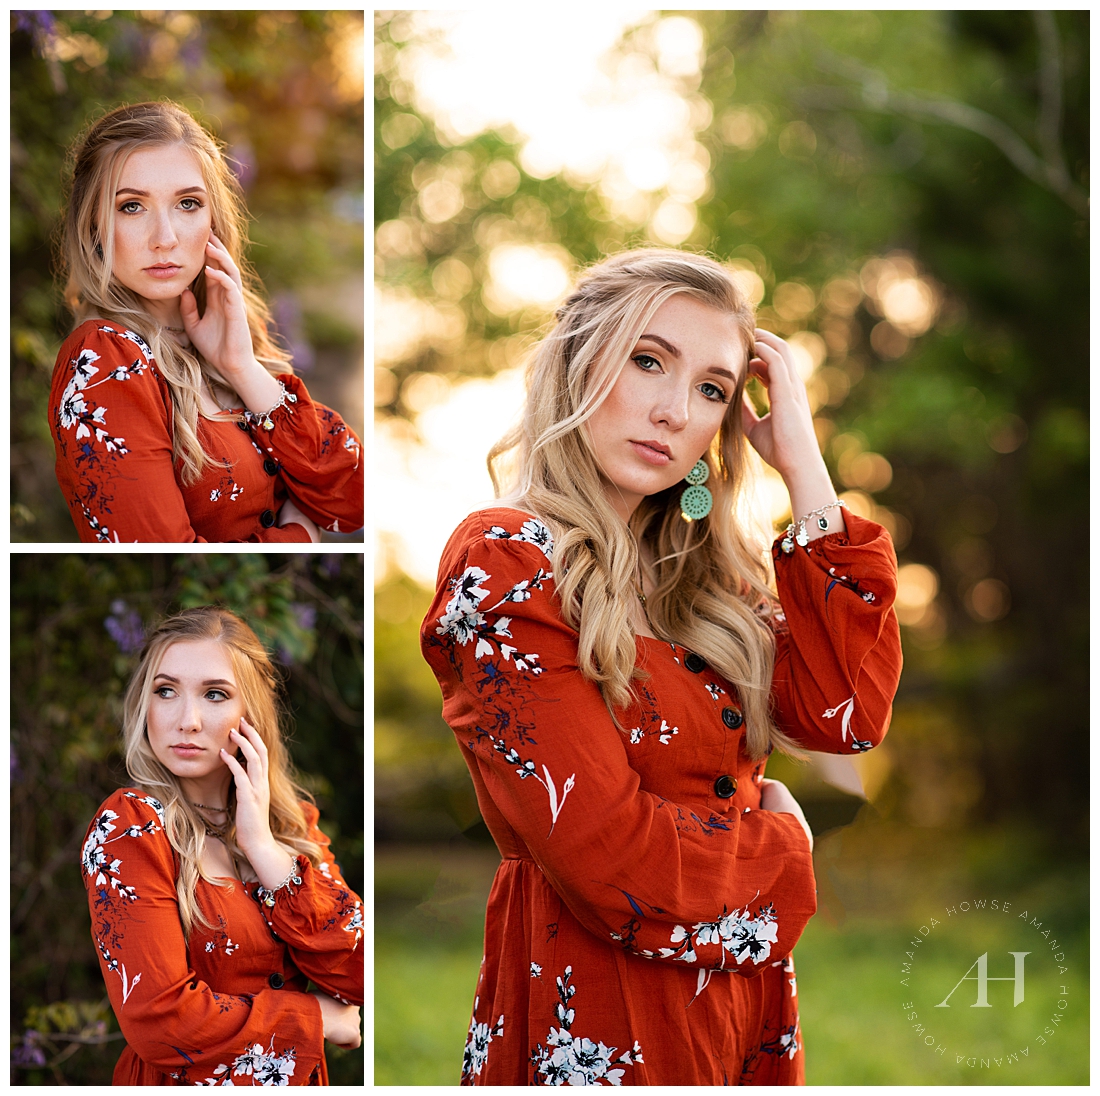 The Best Lighting for Senior Portraits | Outdoor Senior Portraits in Tacoma | Photographed by Amanda Howse Photography